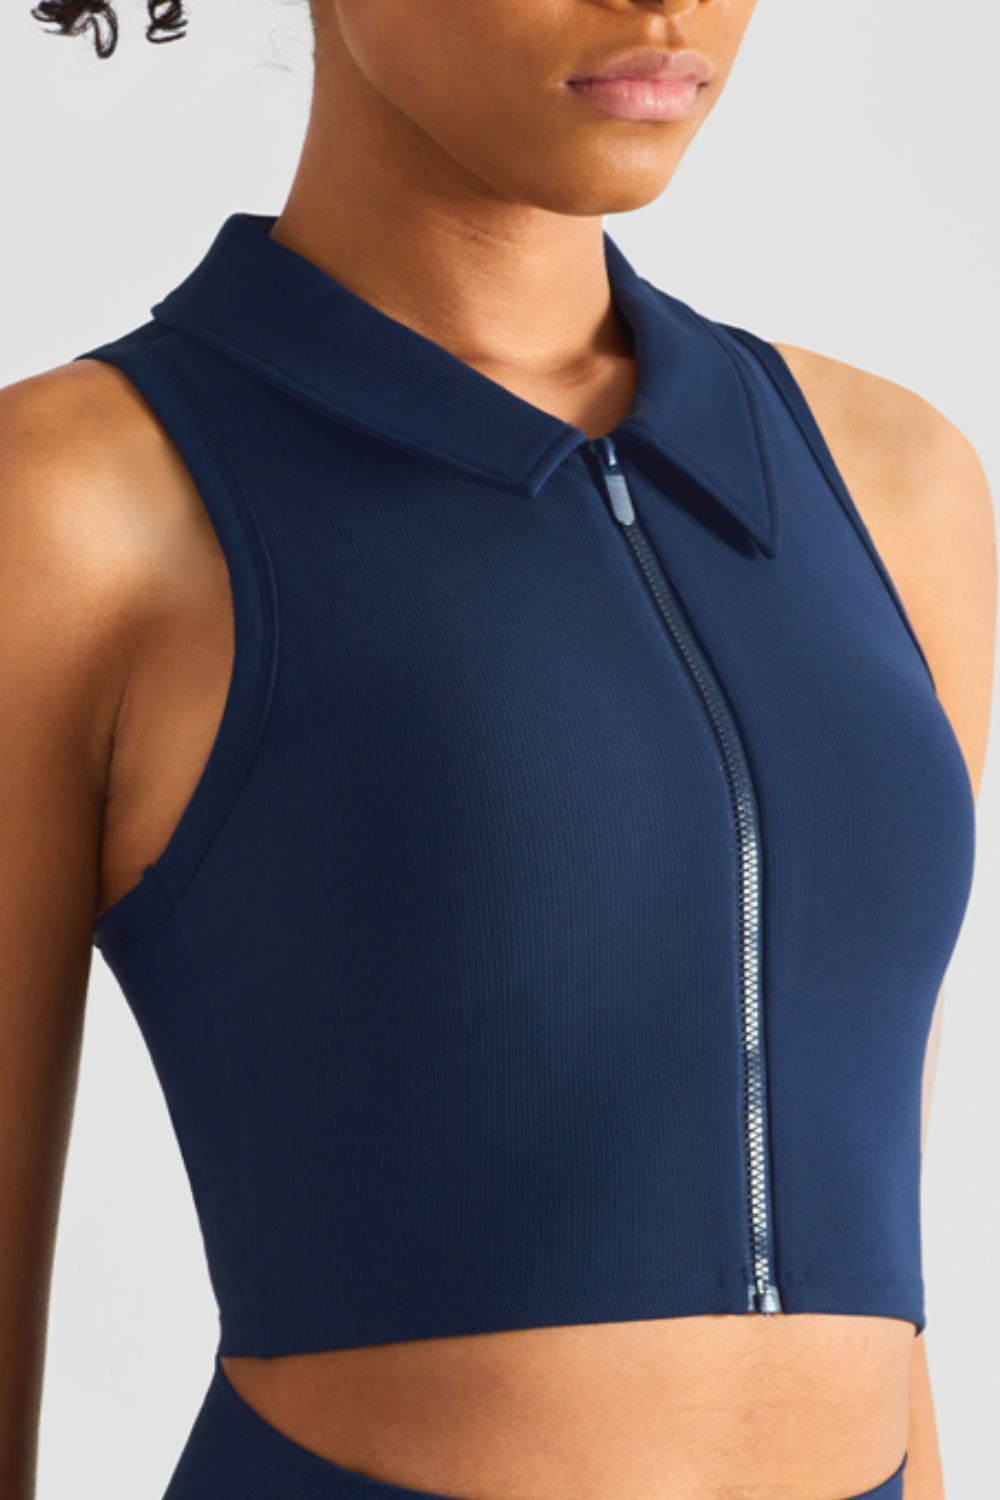 Women’s Zip Up Collared Cropped Sports Top